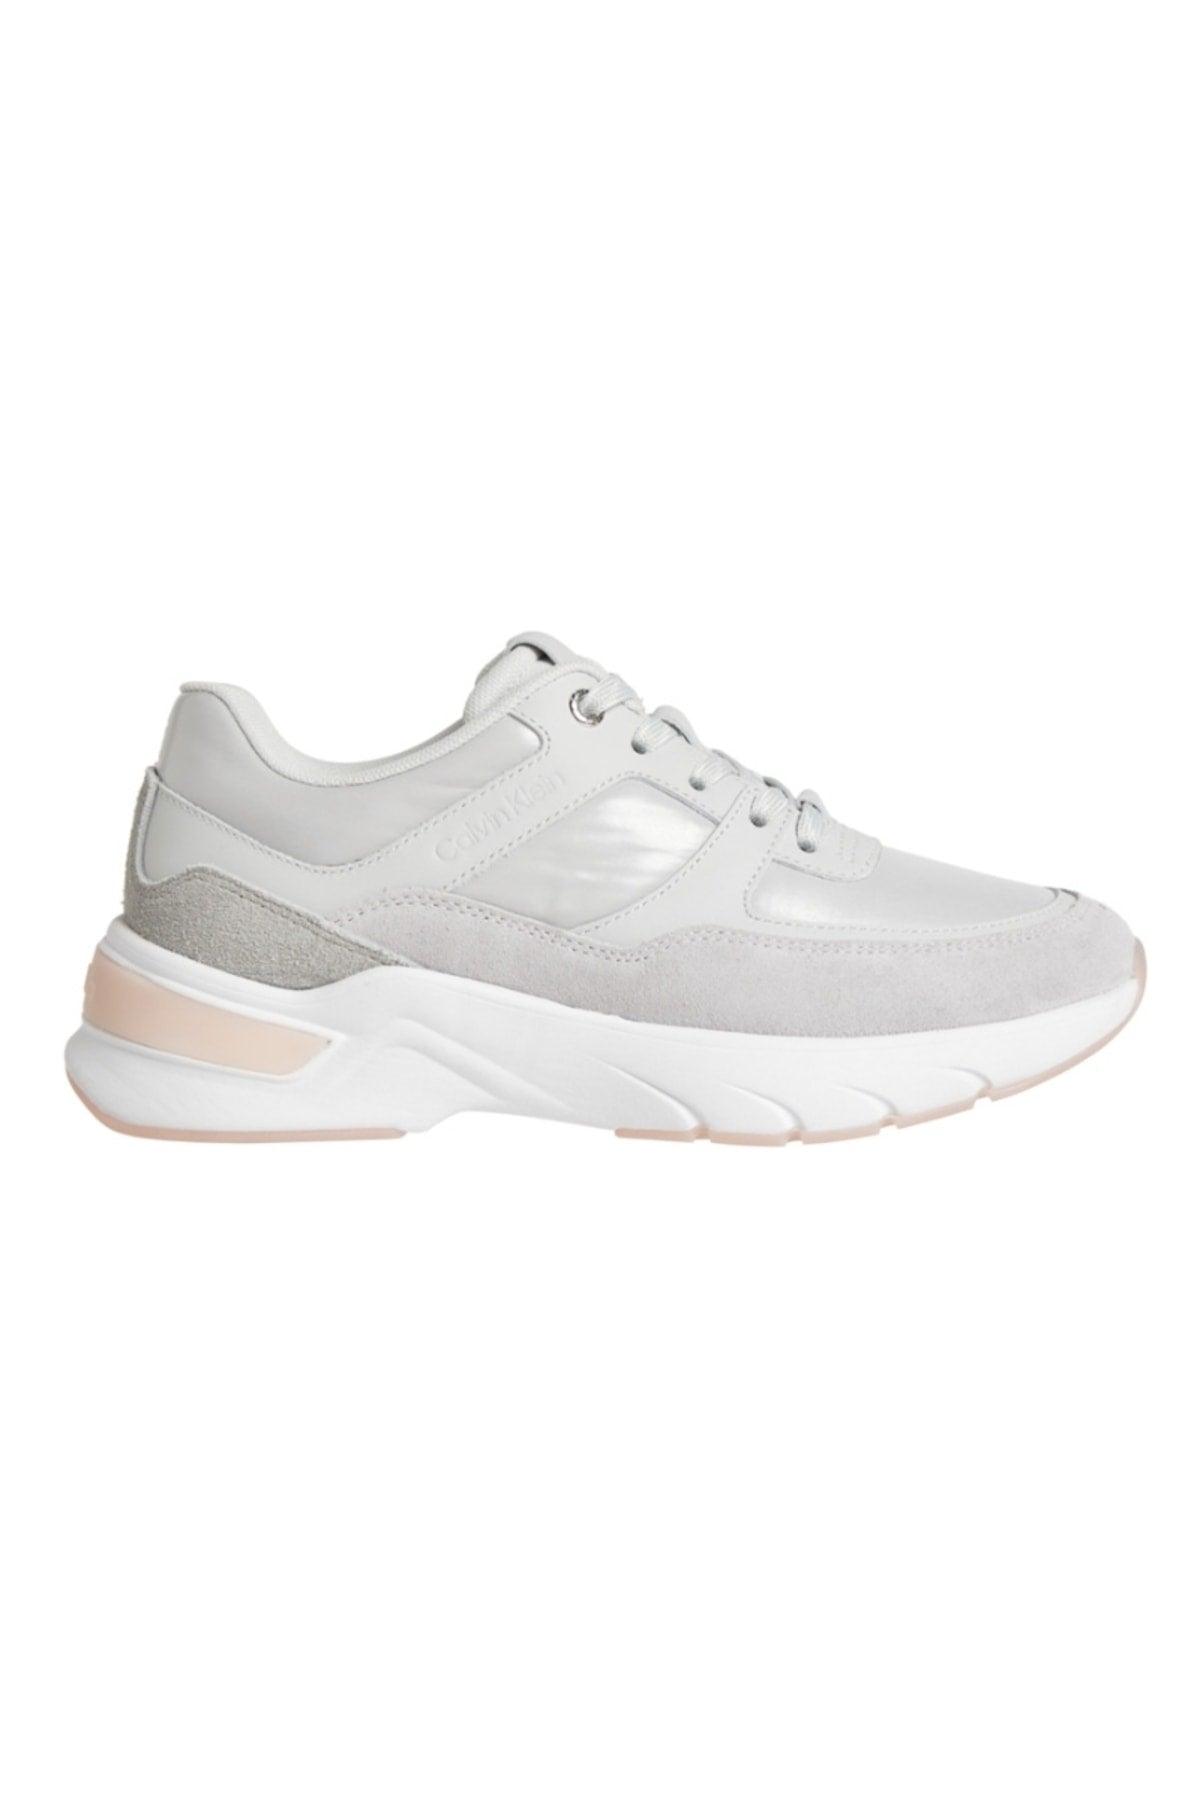 Elevated Runner Lace Up Women's Shoes - Swordslife